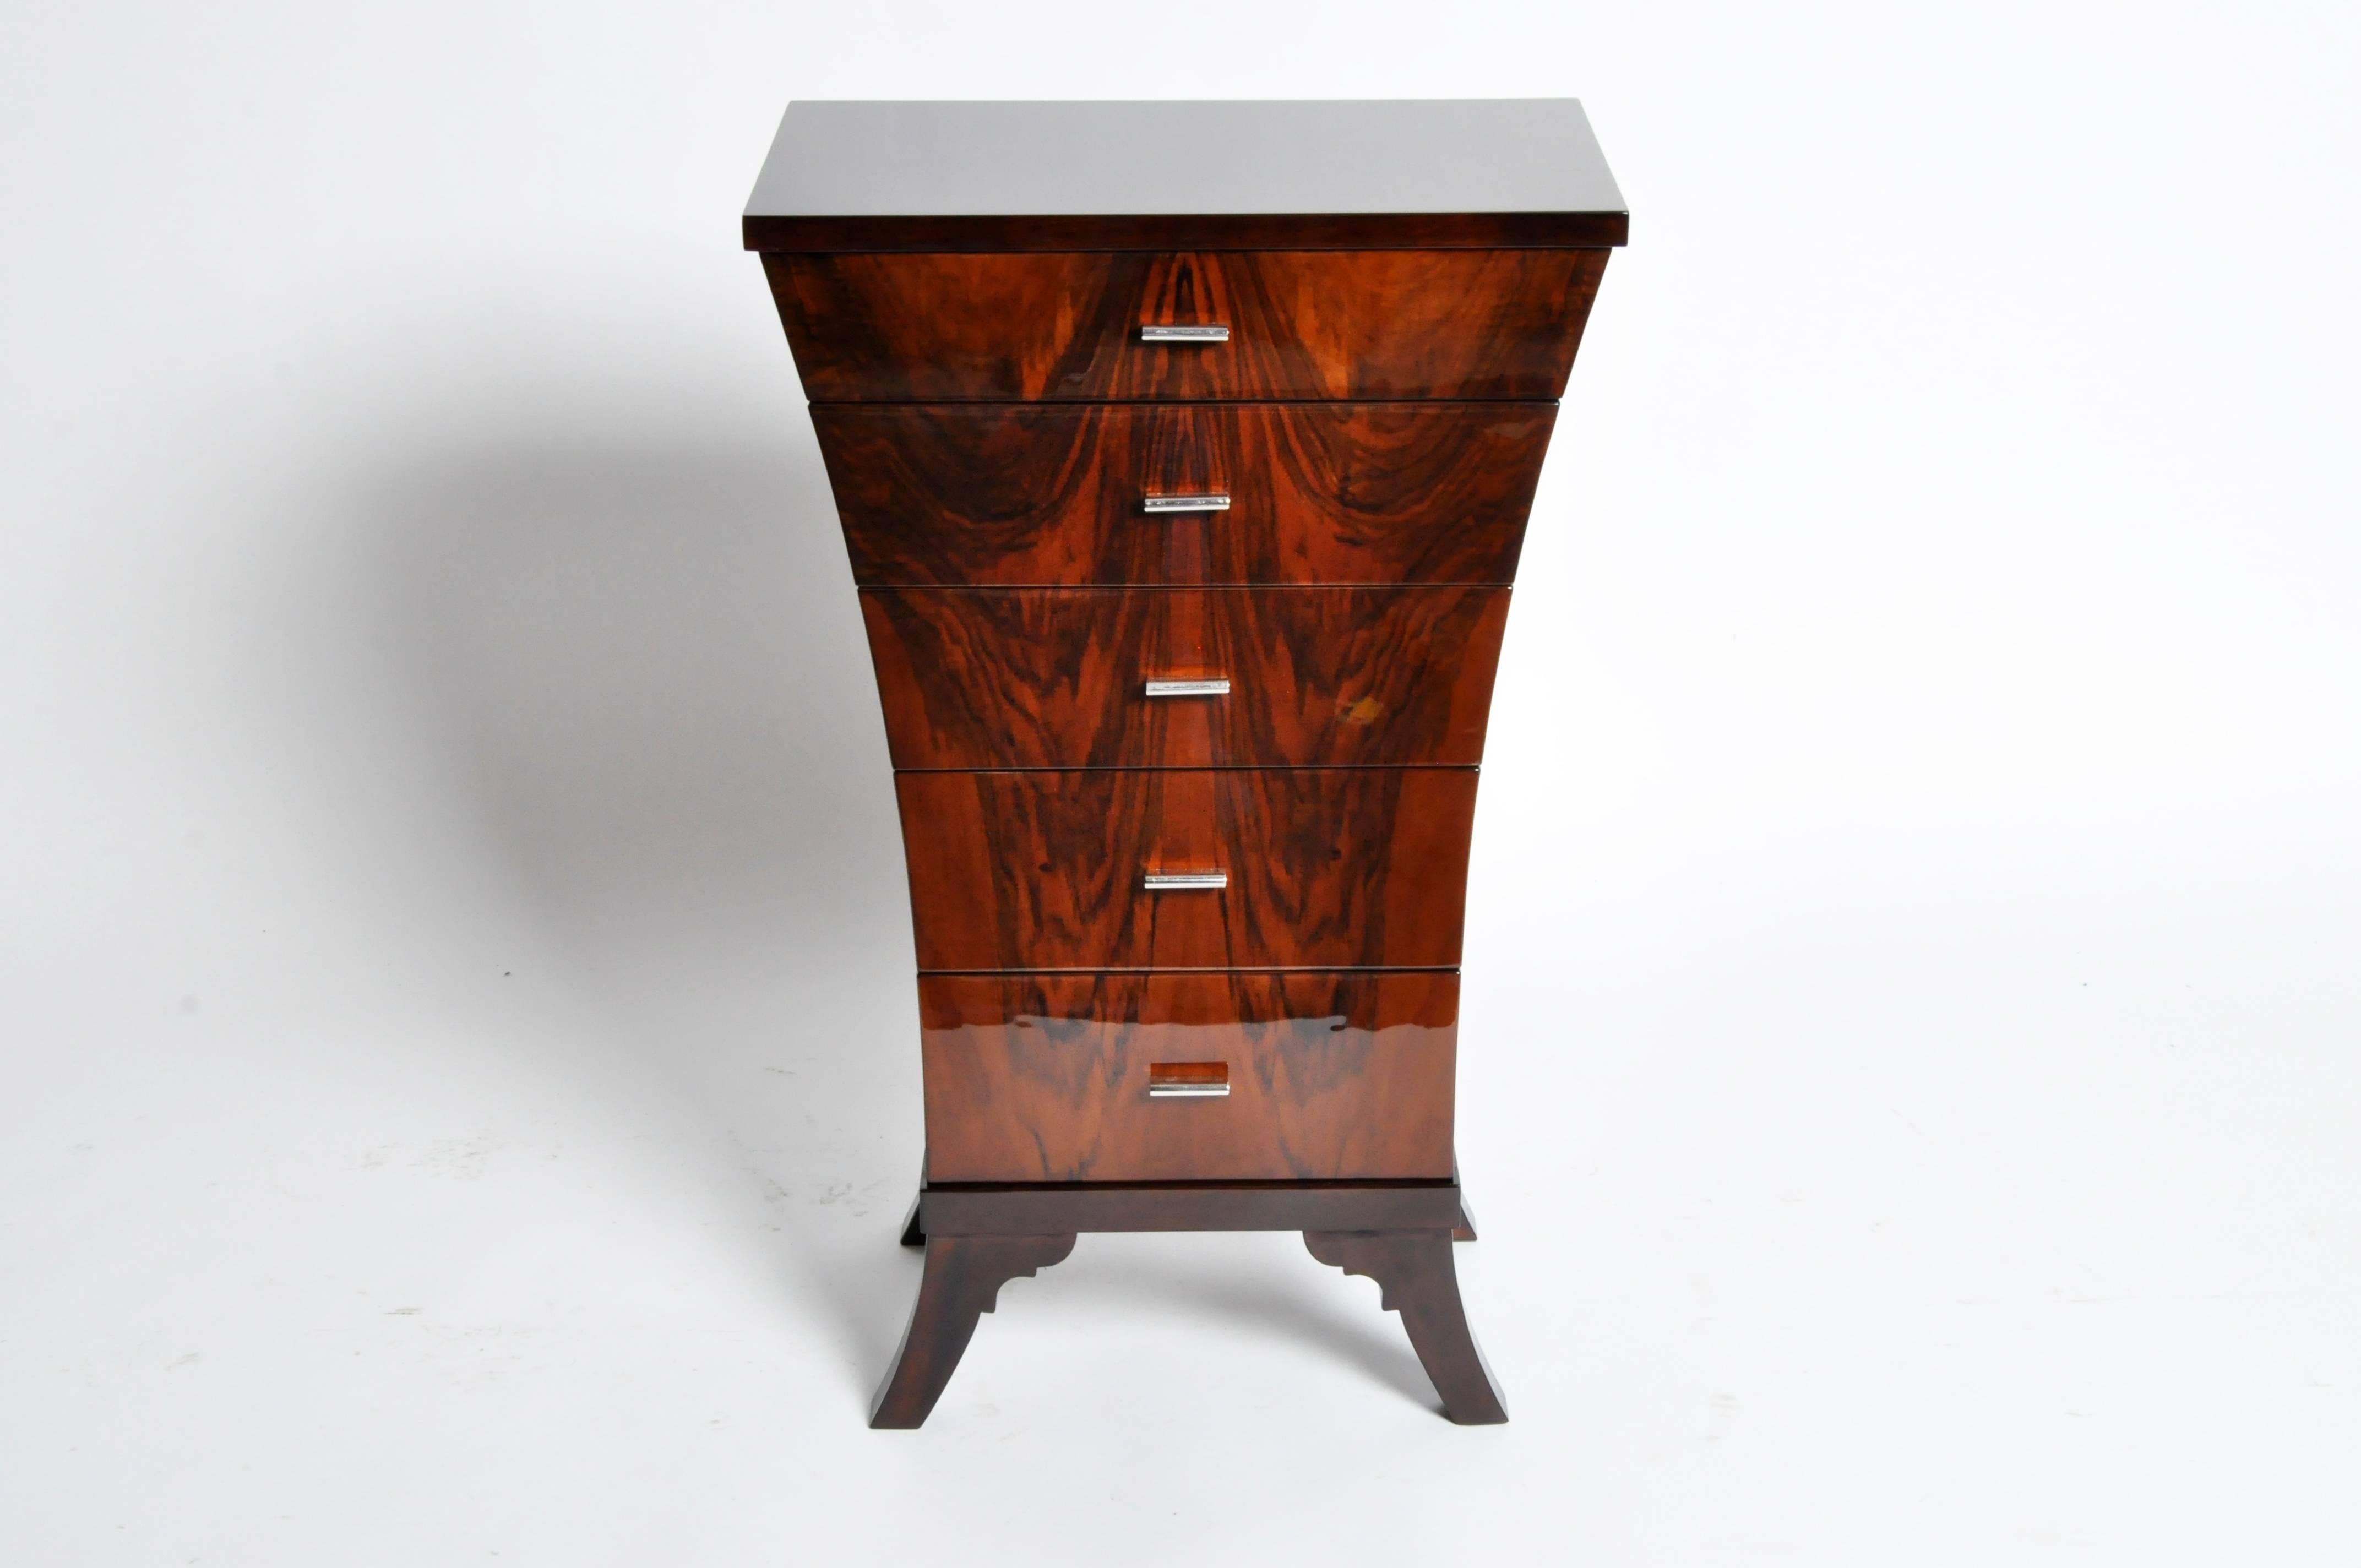 This gorgeous newly made Art Deco style chest of drawers is from Hungary and is made from walnut veneer. This piece features curved sides and elegant clean lines.